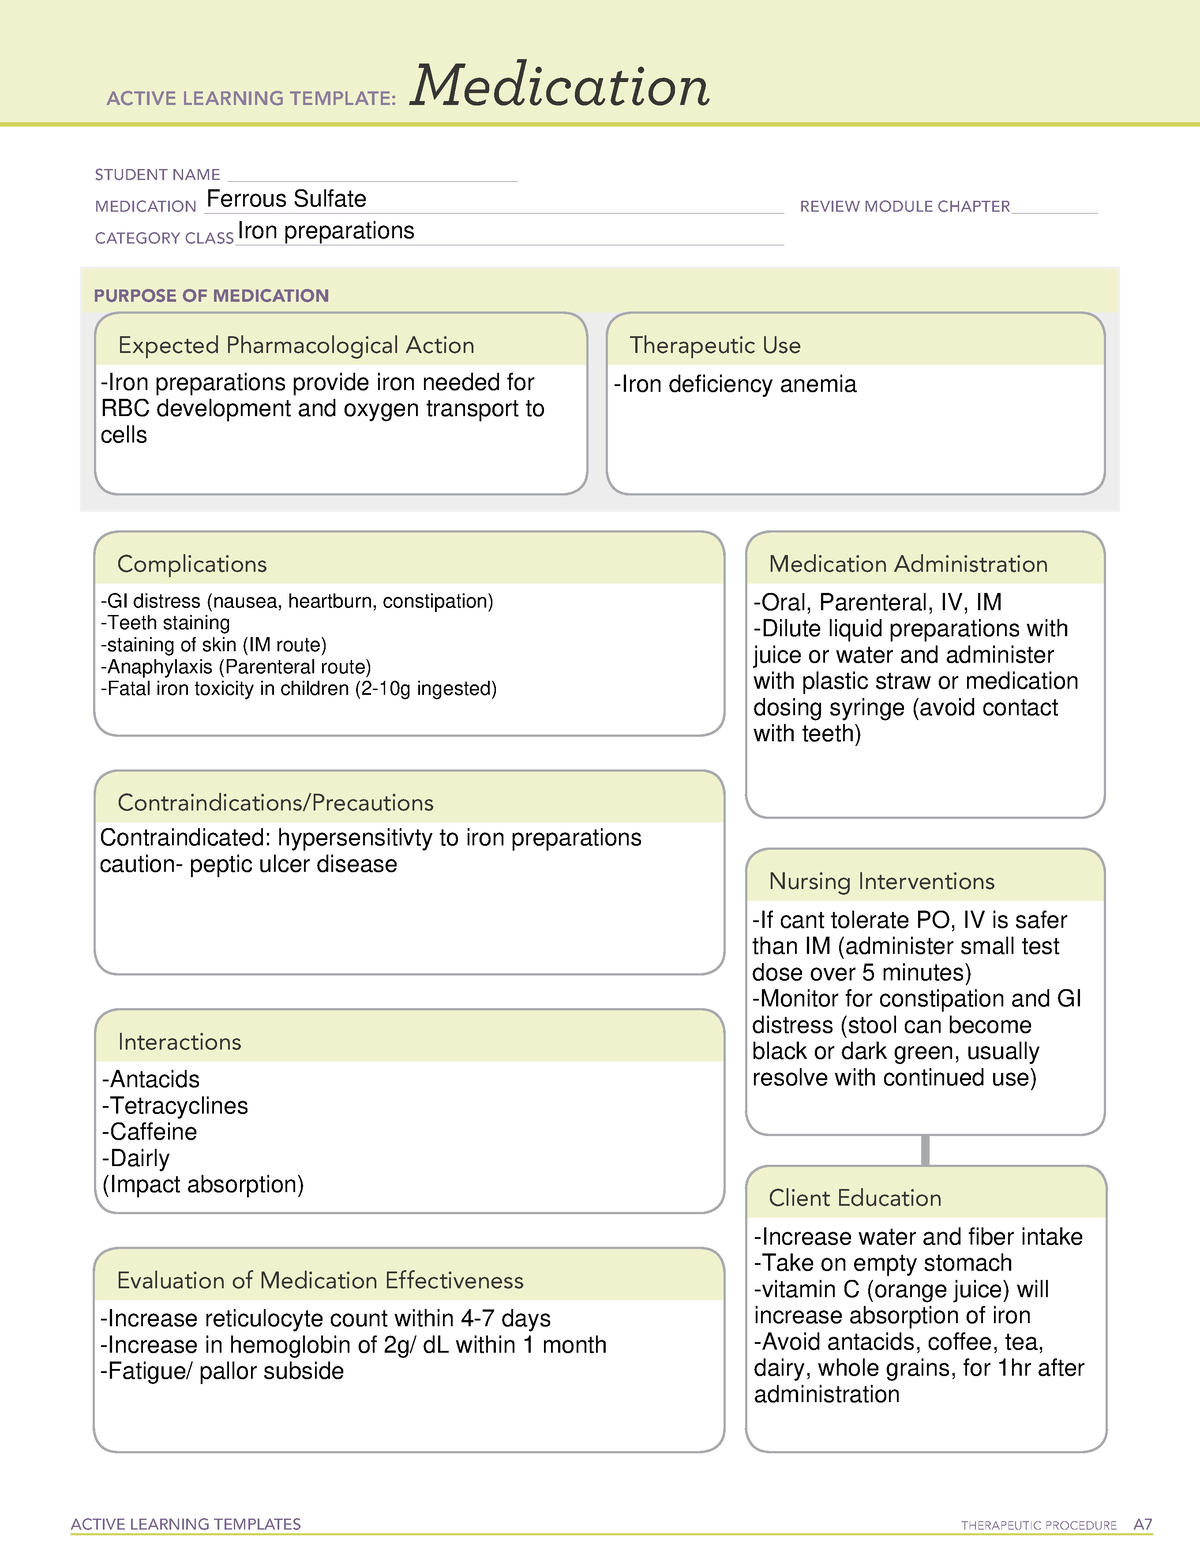 active-learning-template-medication-ferrous-sulfate-active-learning-templates-therapeutic